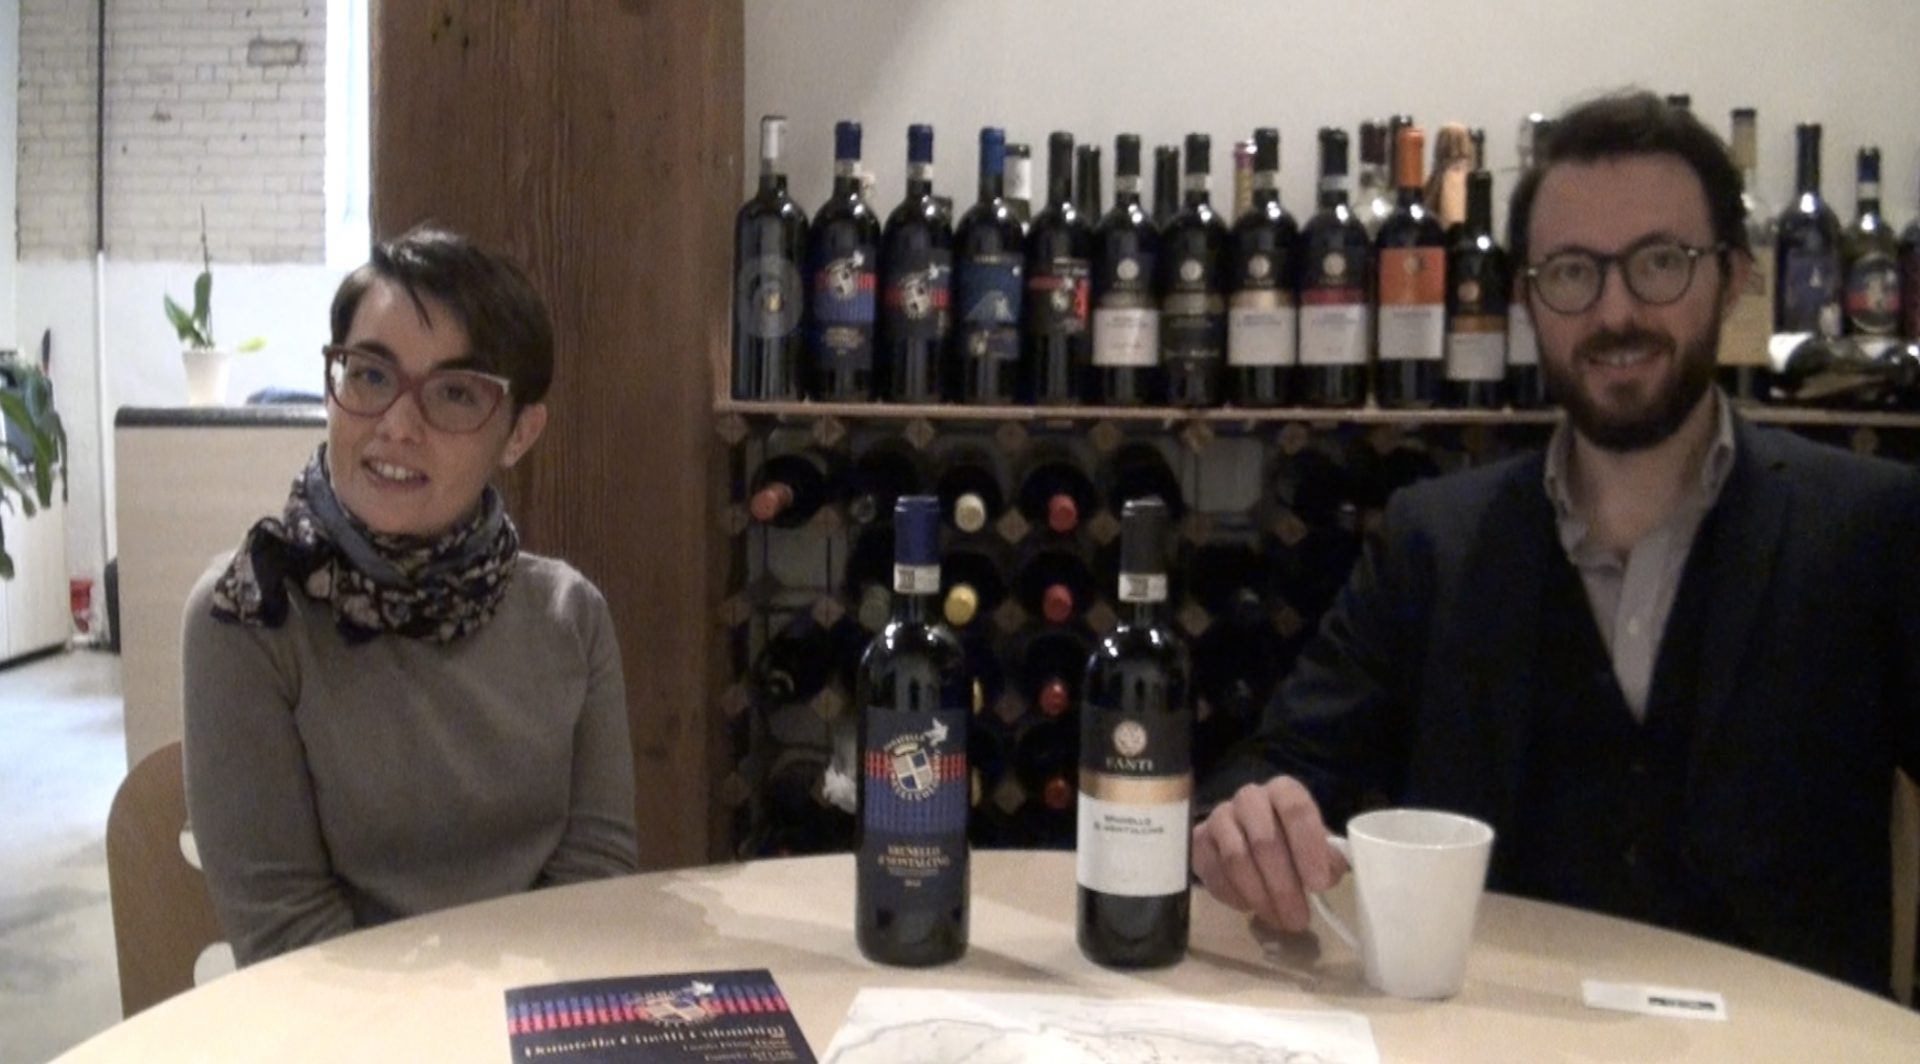 A Look At The 2012 & 2013 Brunello Vintages With Cinelli Colombini & Fanti